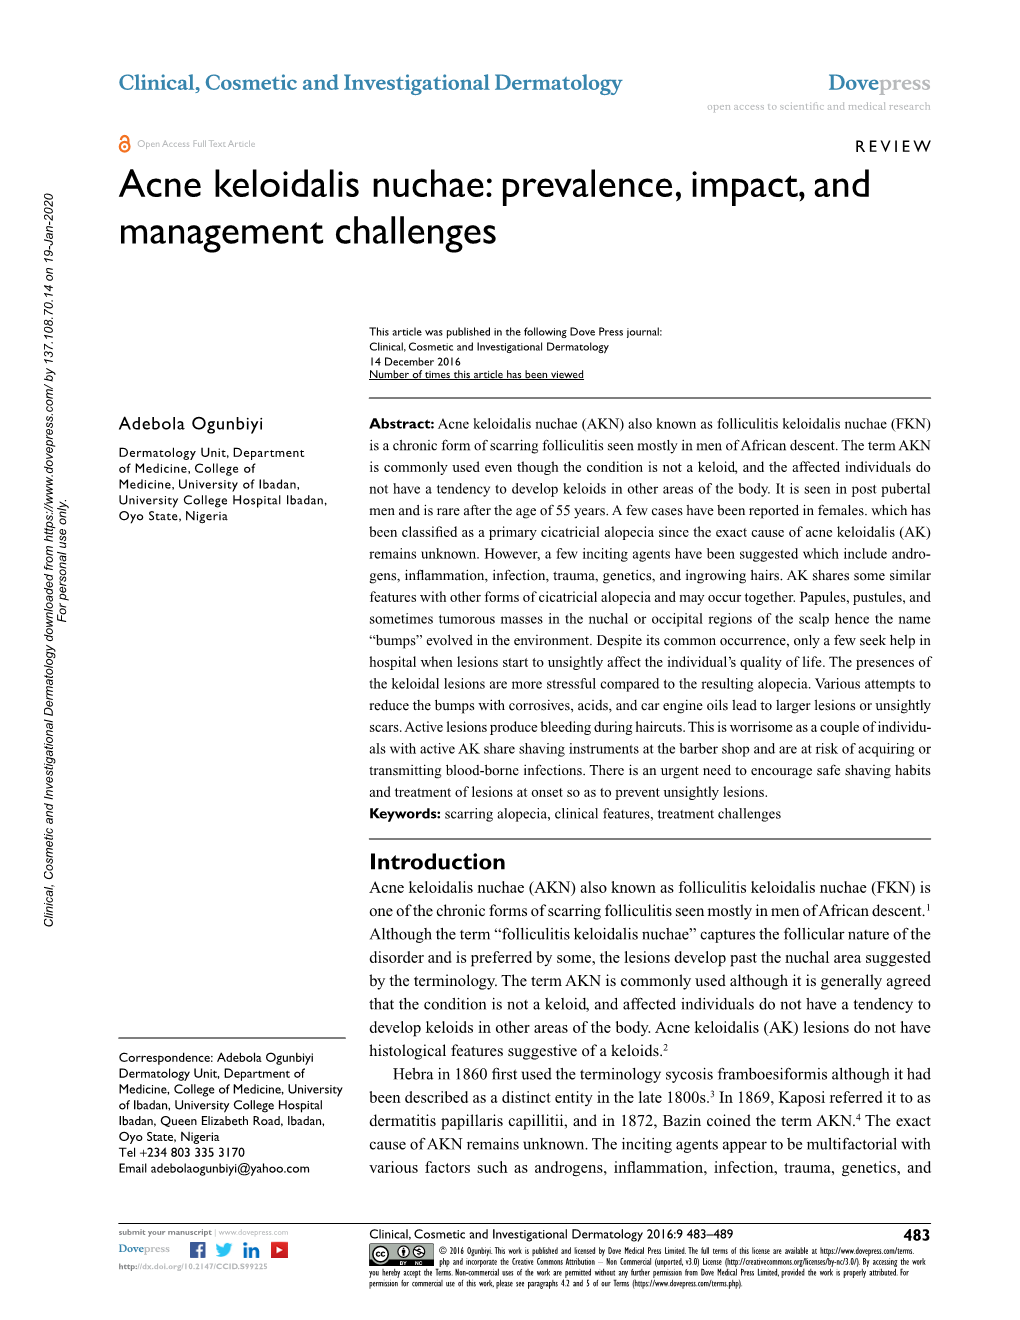 Acne Keloidalis Nuchae Open Access to Scientific and Medical Research DOI